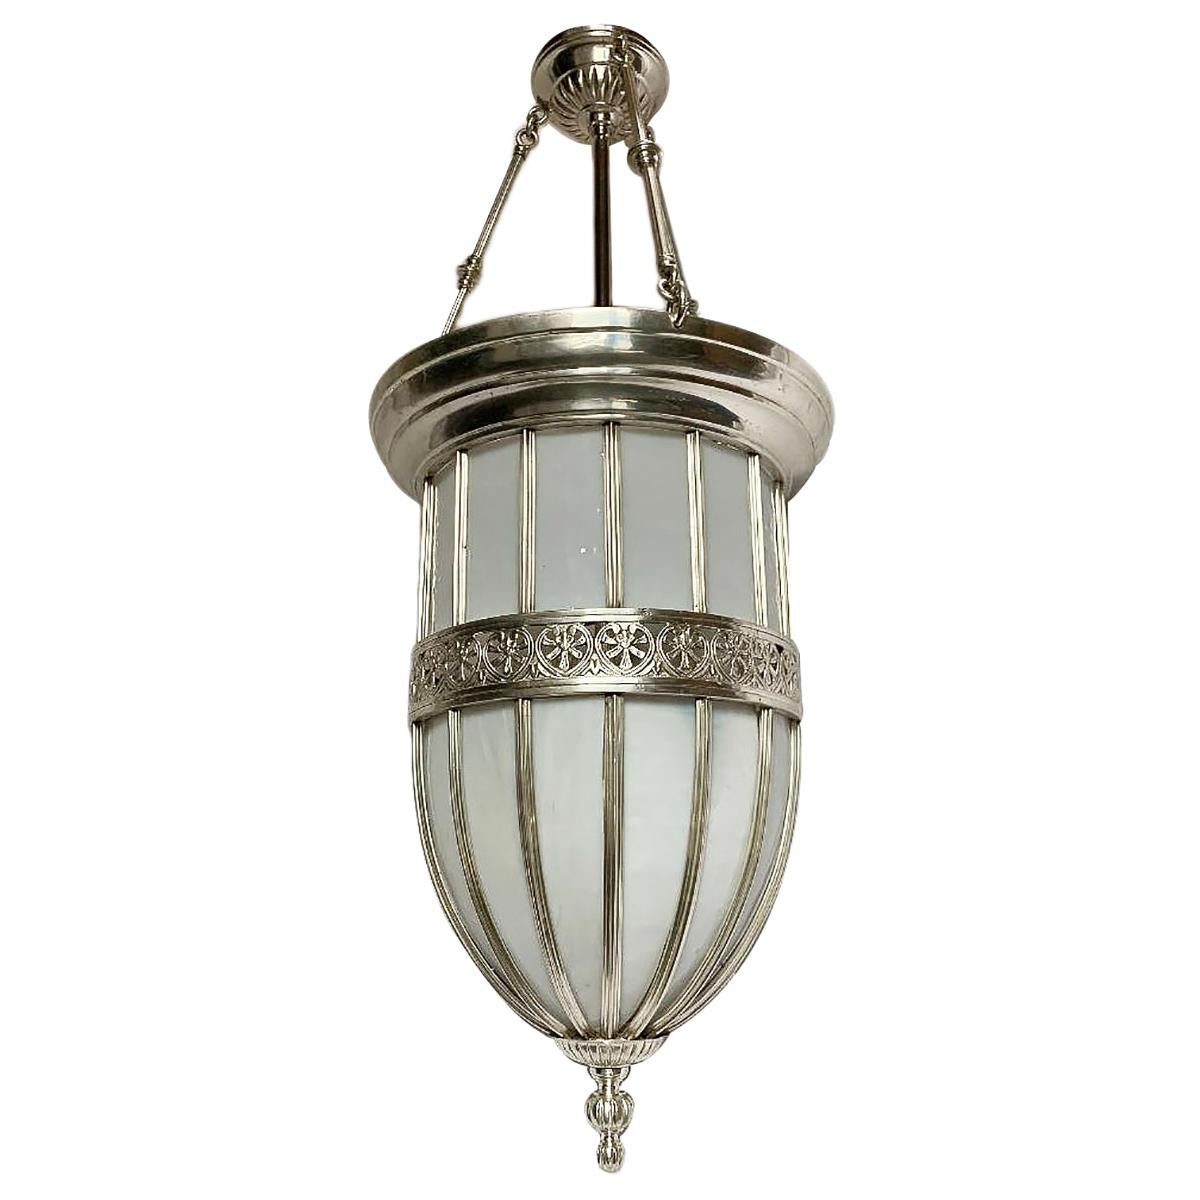 Pair of English Neoclassic Silver Plated Lanterns, Sold Individually